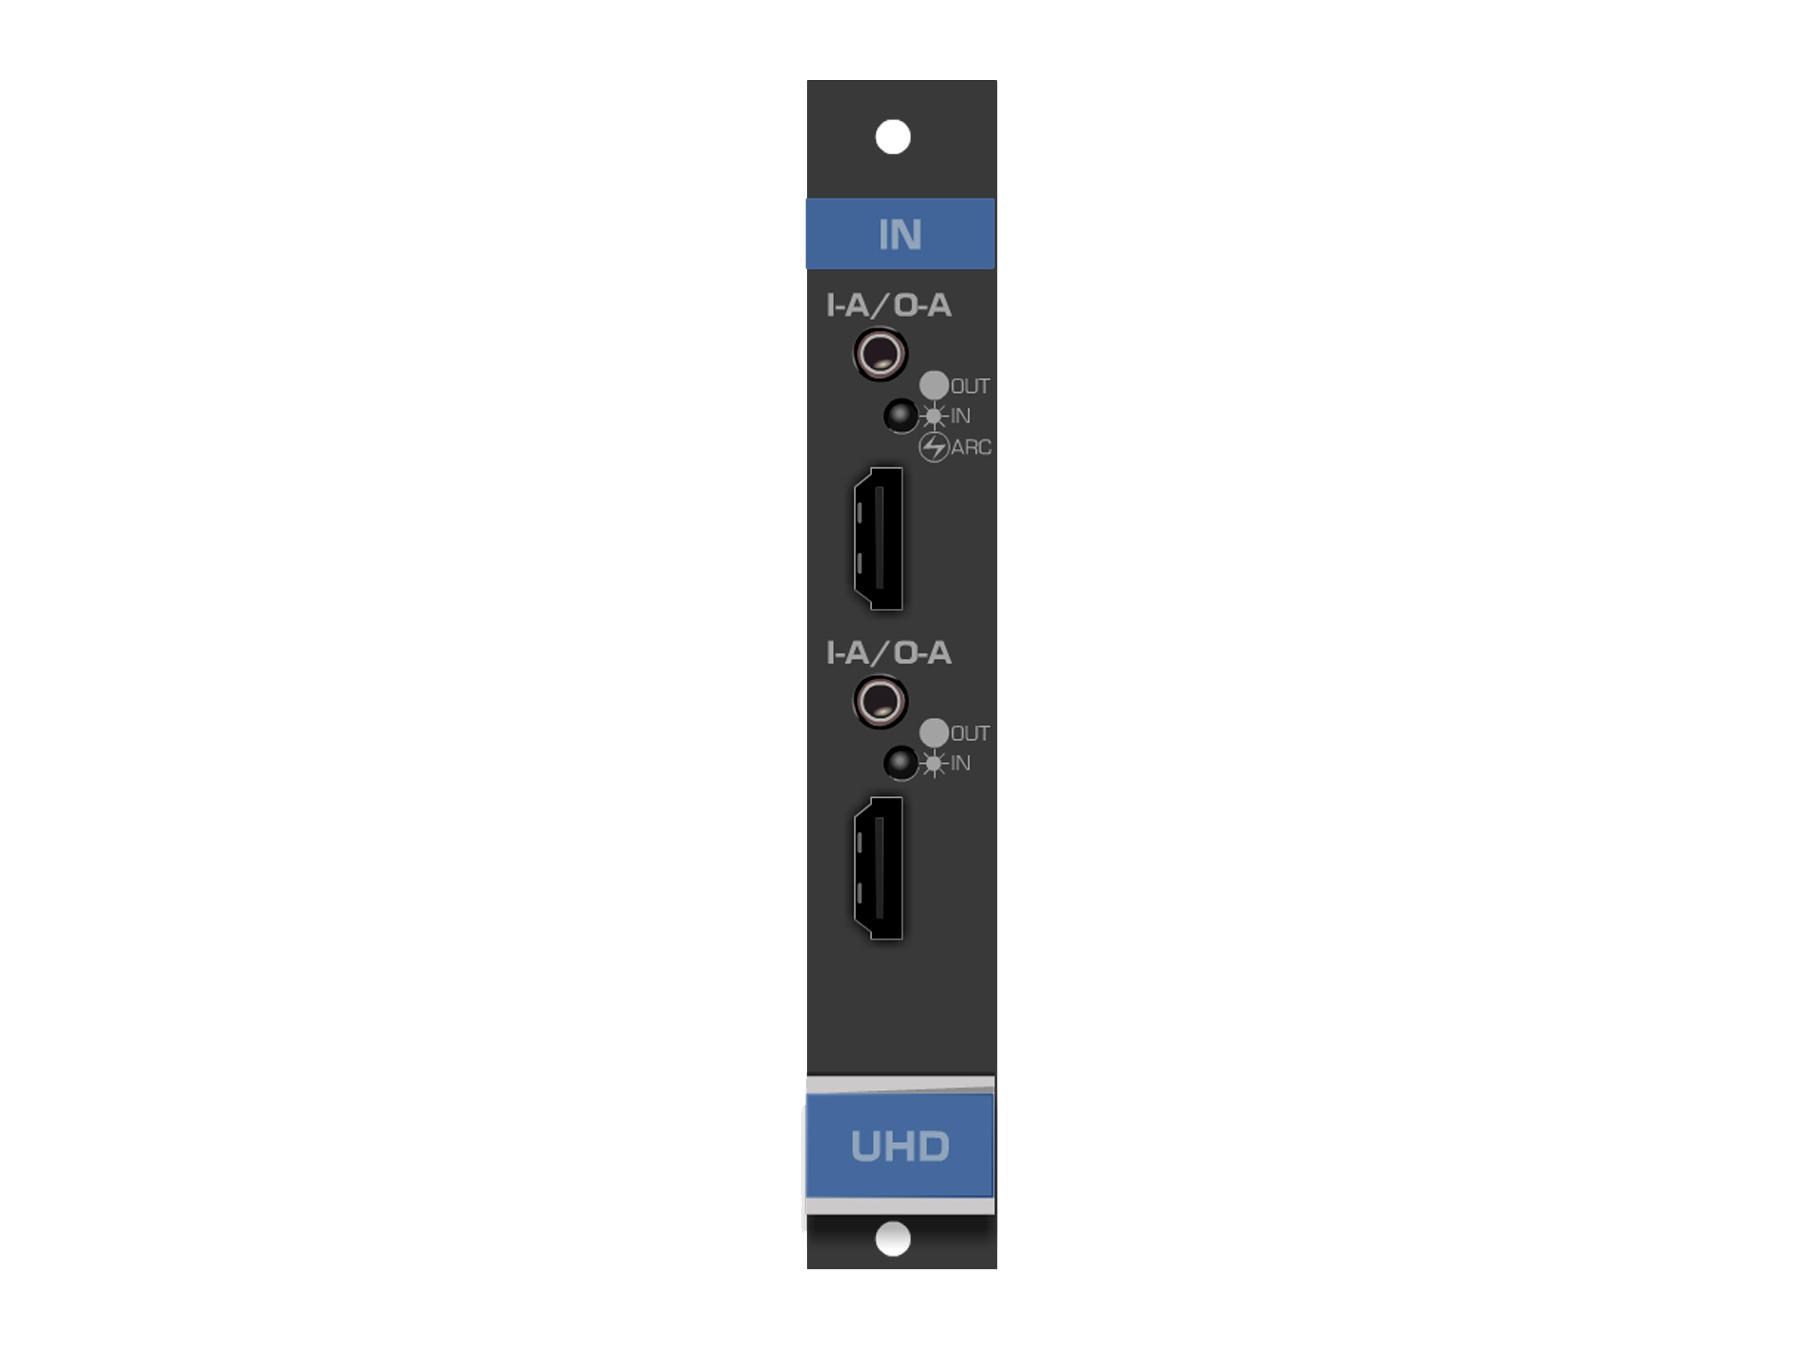 Kramer UHDA-IN2-F16 2-Input 4K HDMI with Selectable Analog Audio Card for VS-1616D Matrix Switcher (F-16)